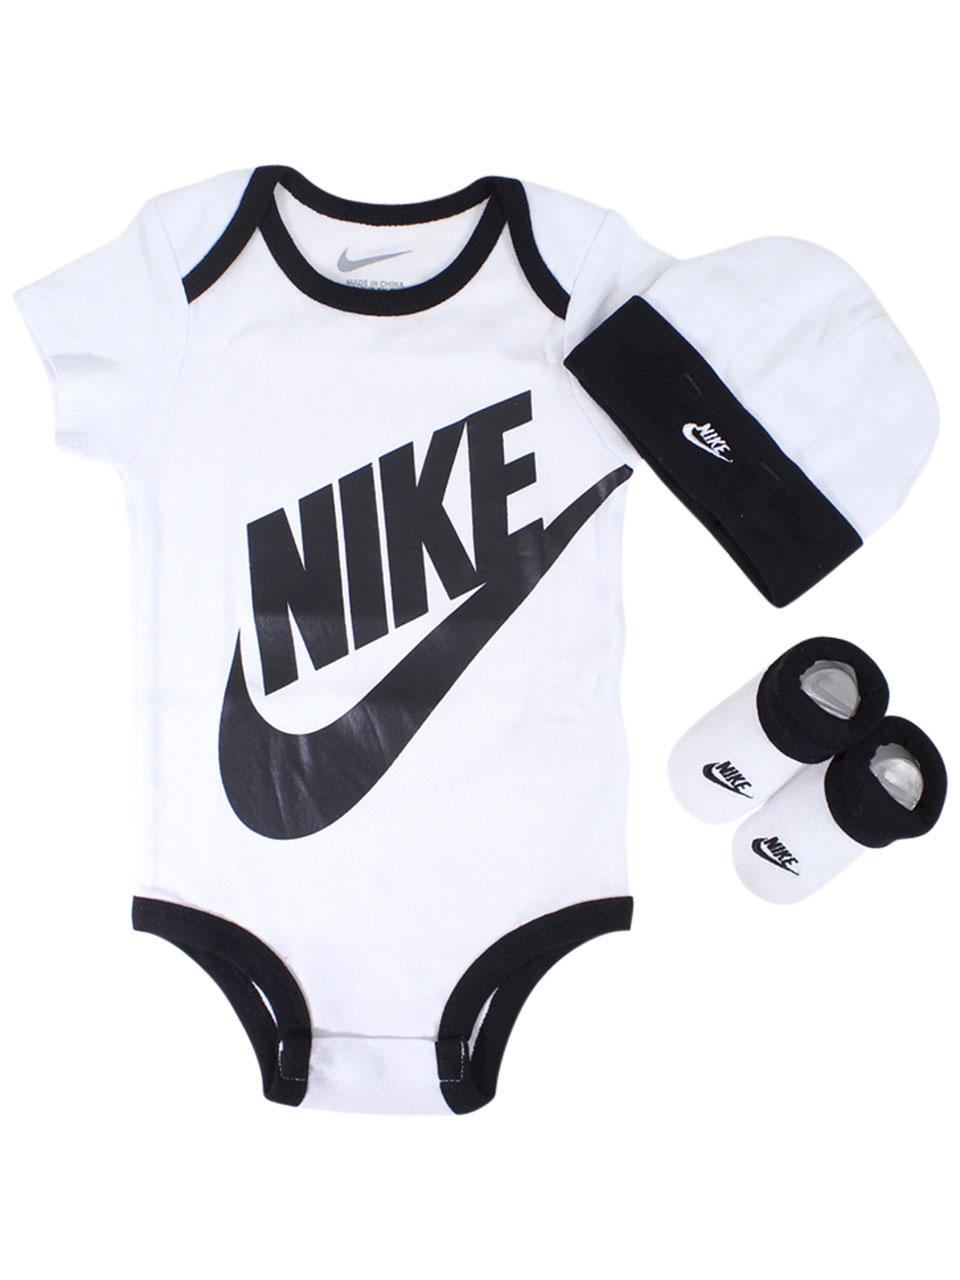 nike infant outfit